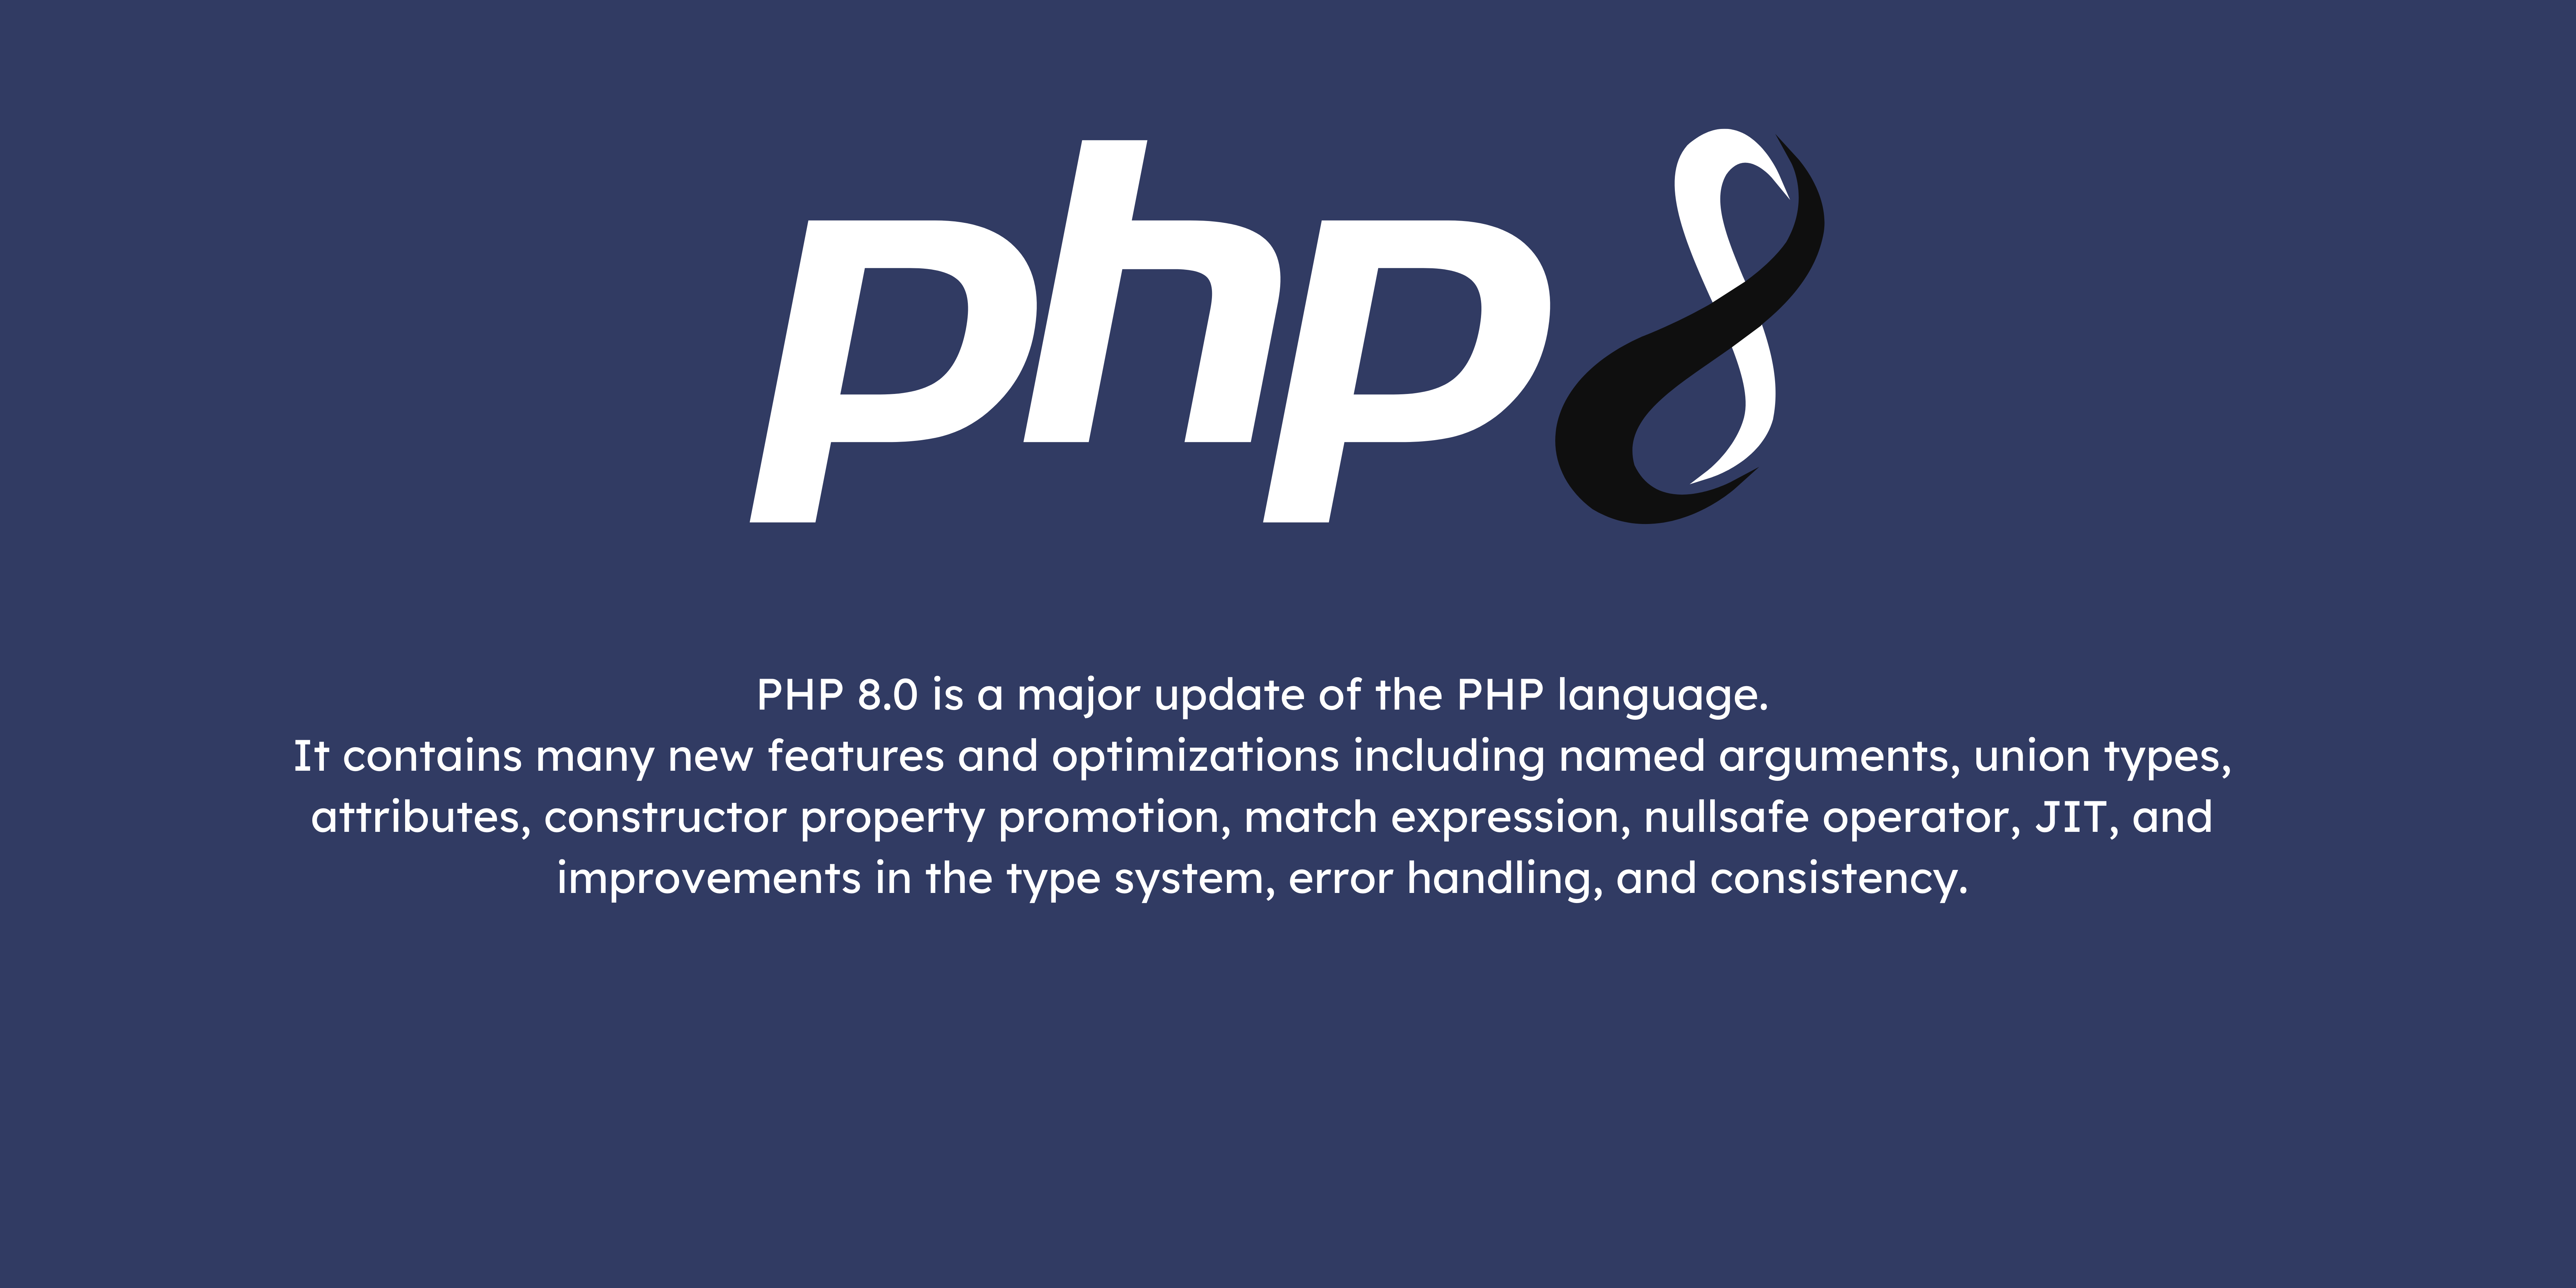 Latest feature in php 8